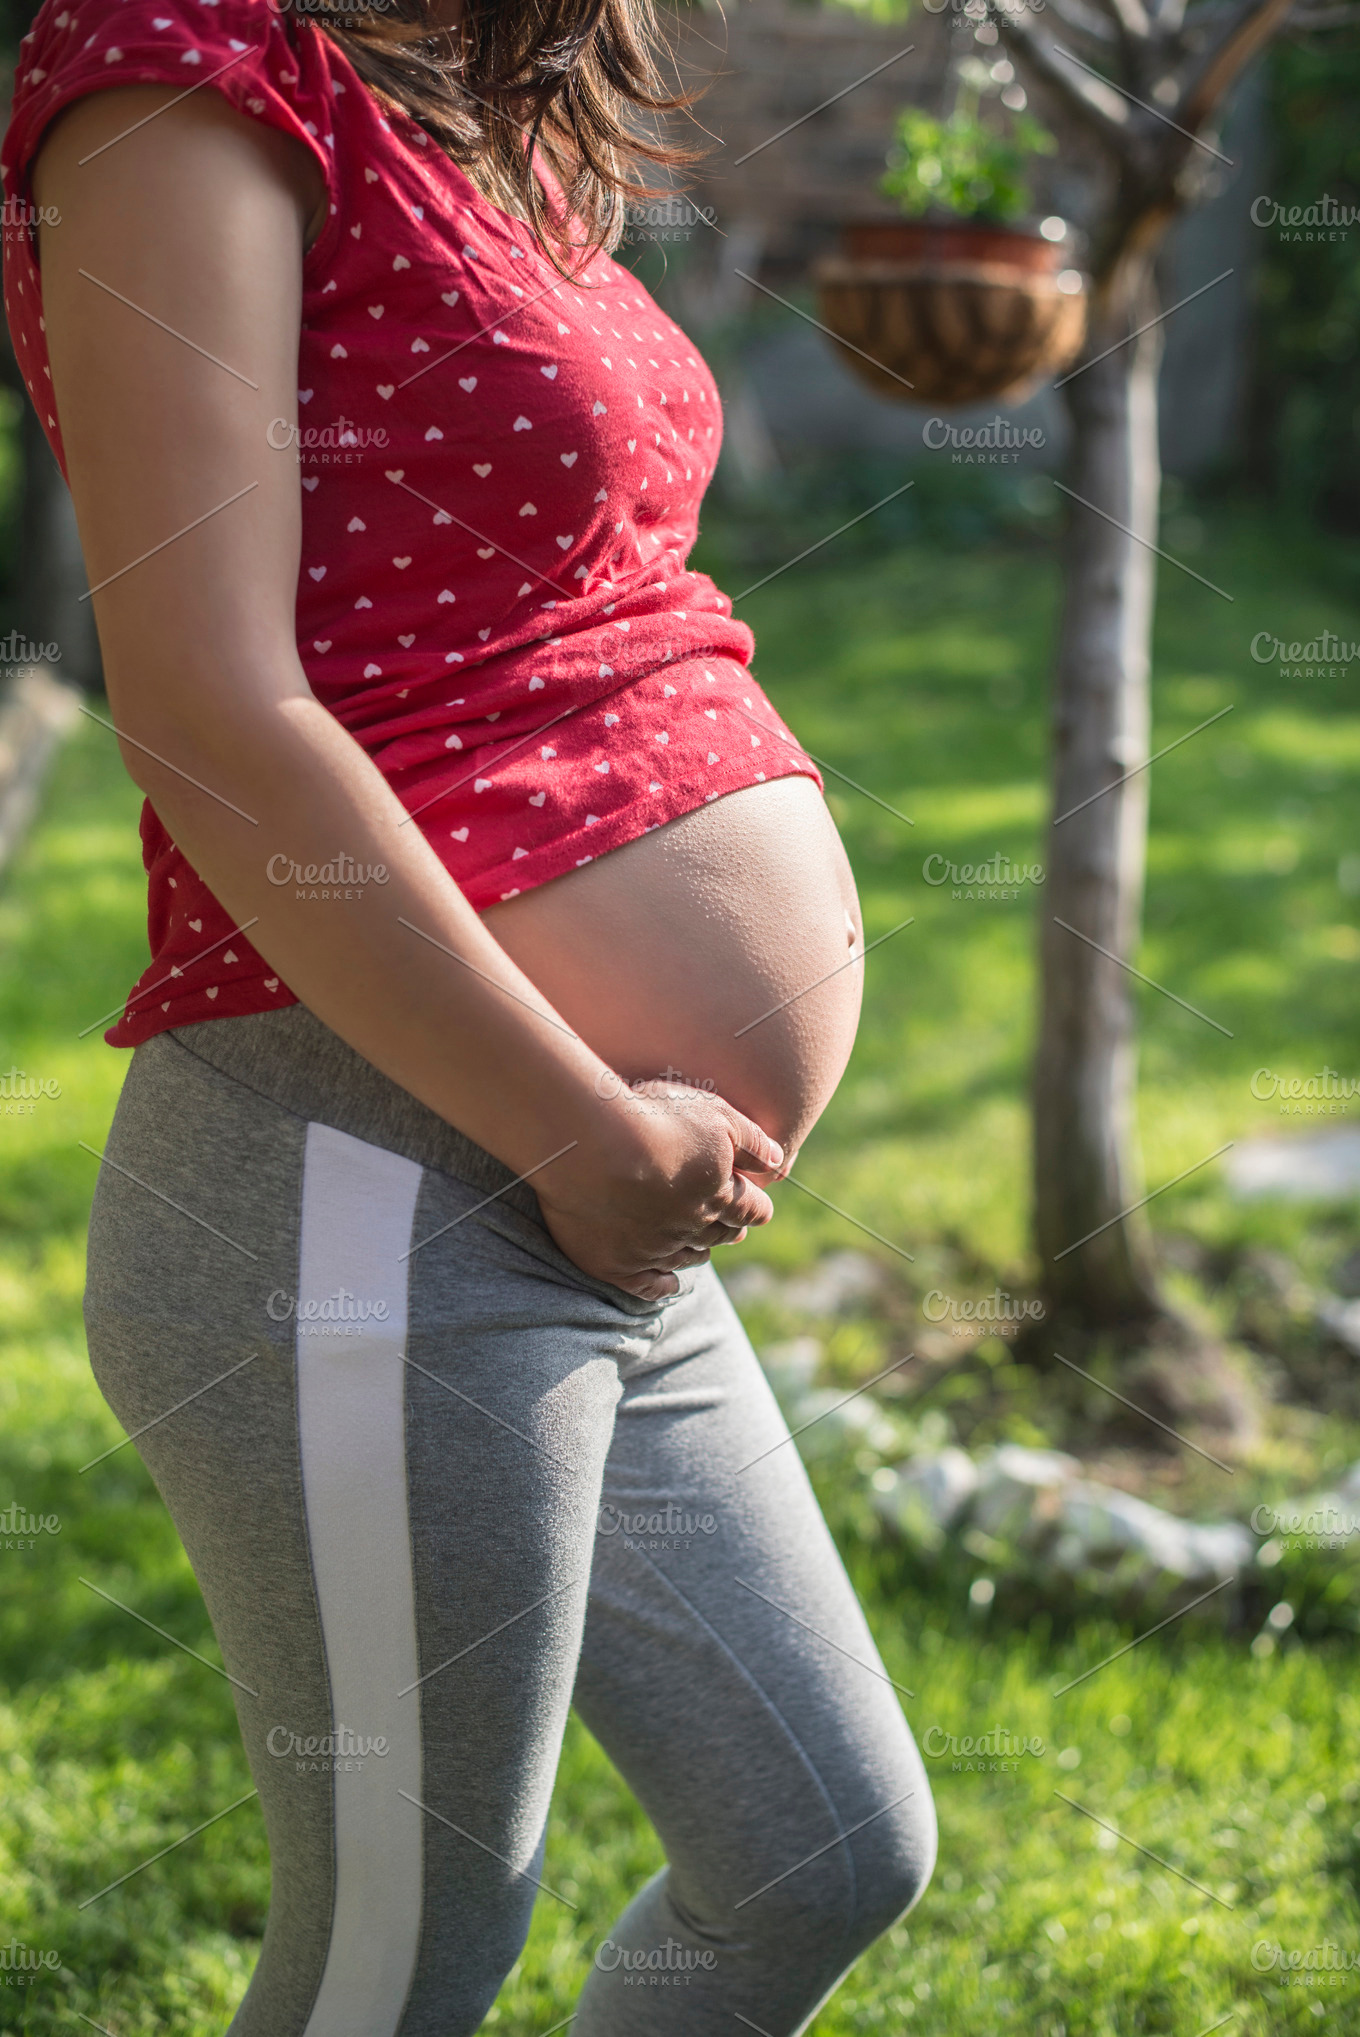 Pregnant Woman Shows His Belly In T High Quality People Images ~ Creative Market